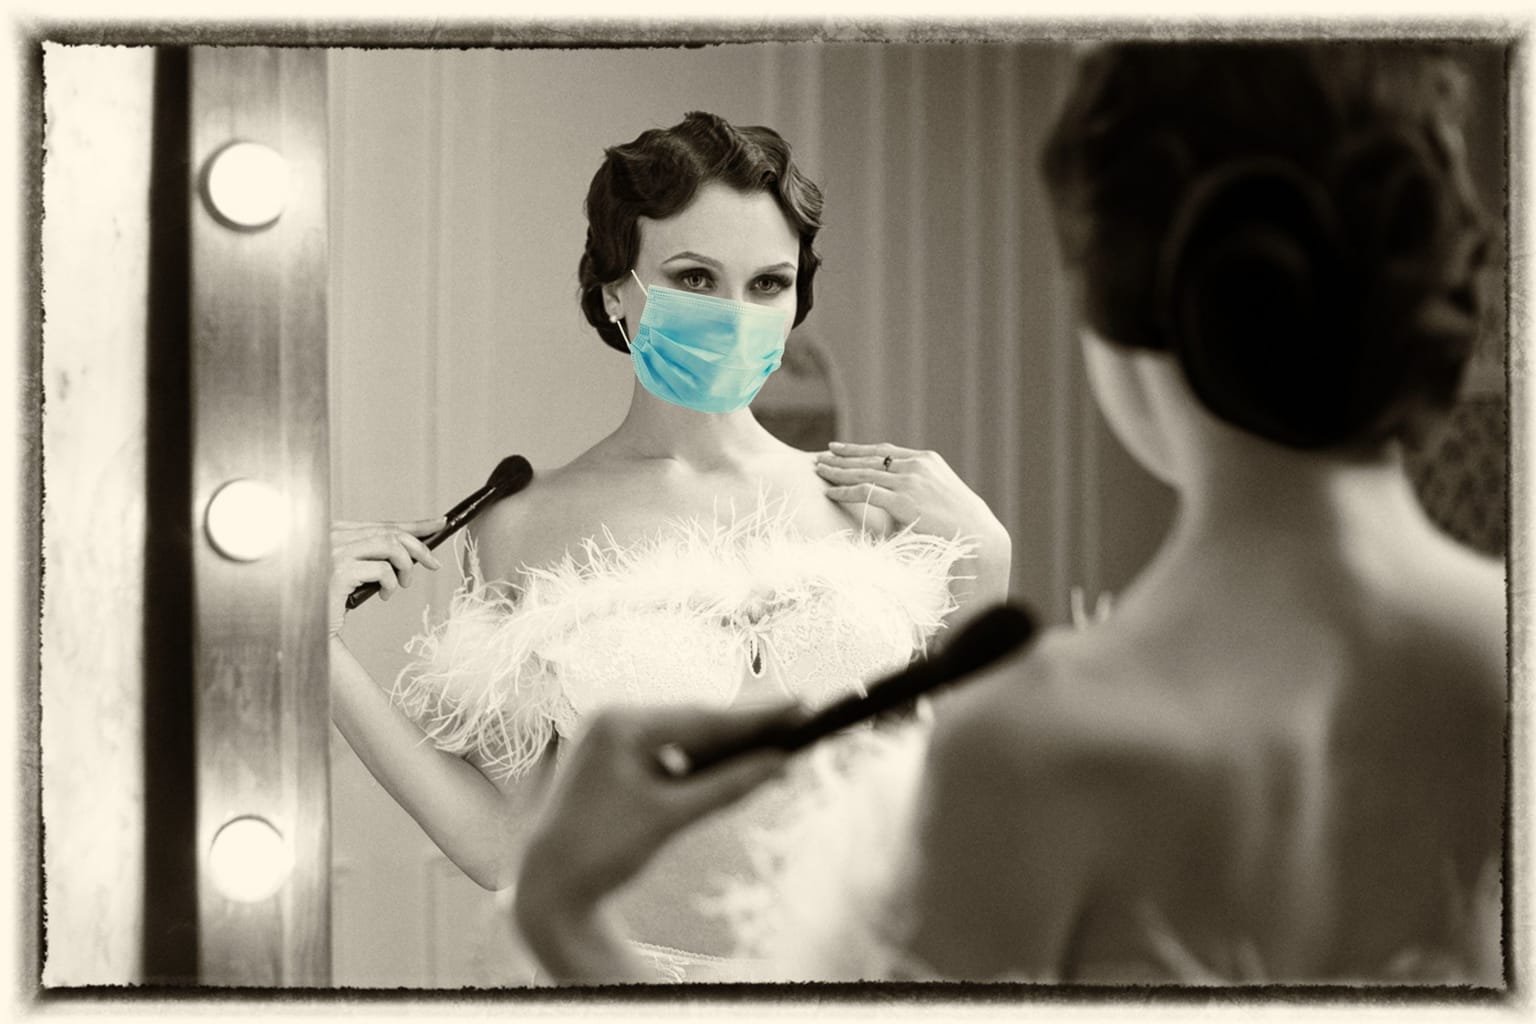 All Dressed Up and Nowhere to Go: Dating During The Pandemic, a Tokyo series